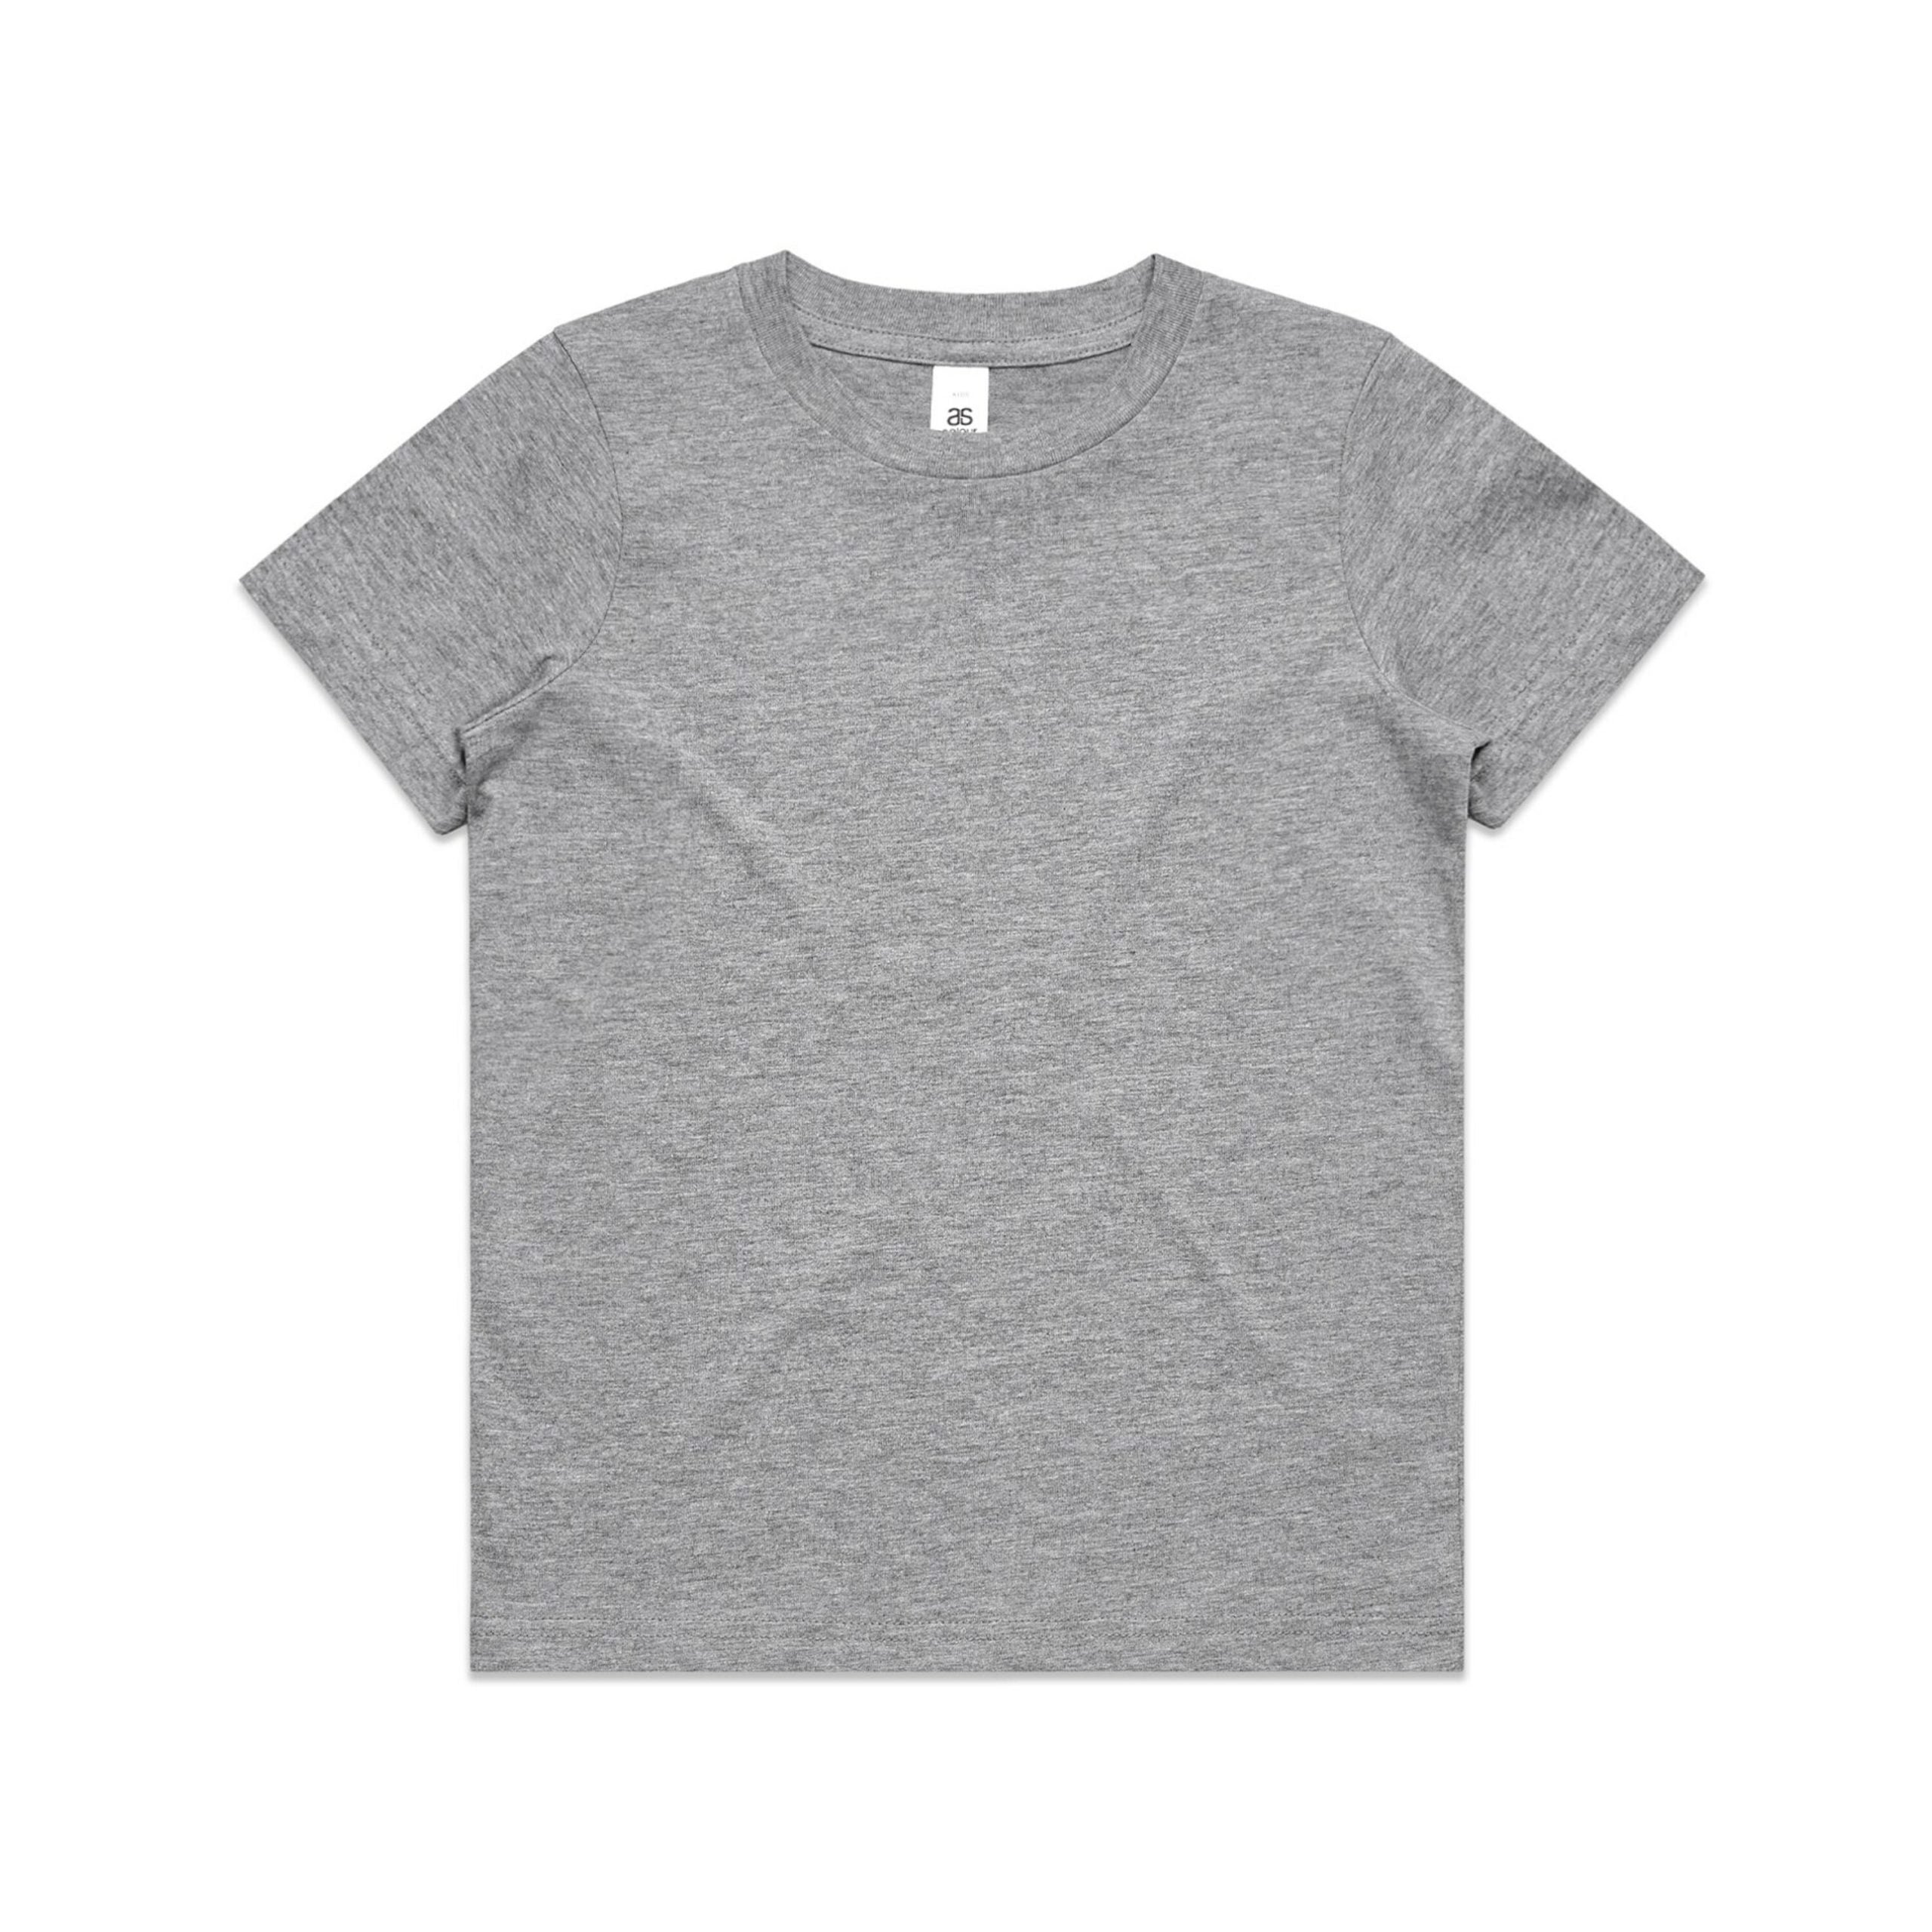 3006_AS_Youth-Tee_Grey-Marle-scaled